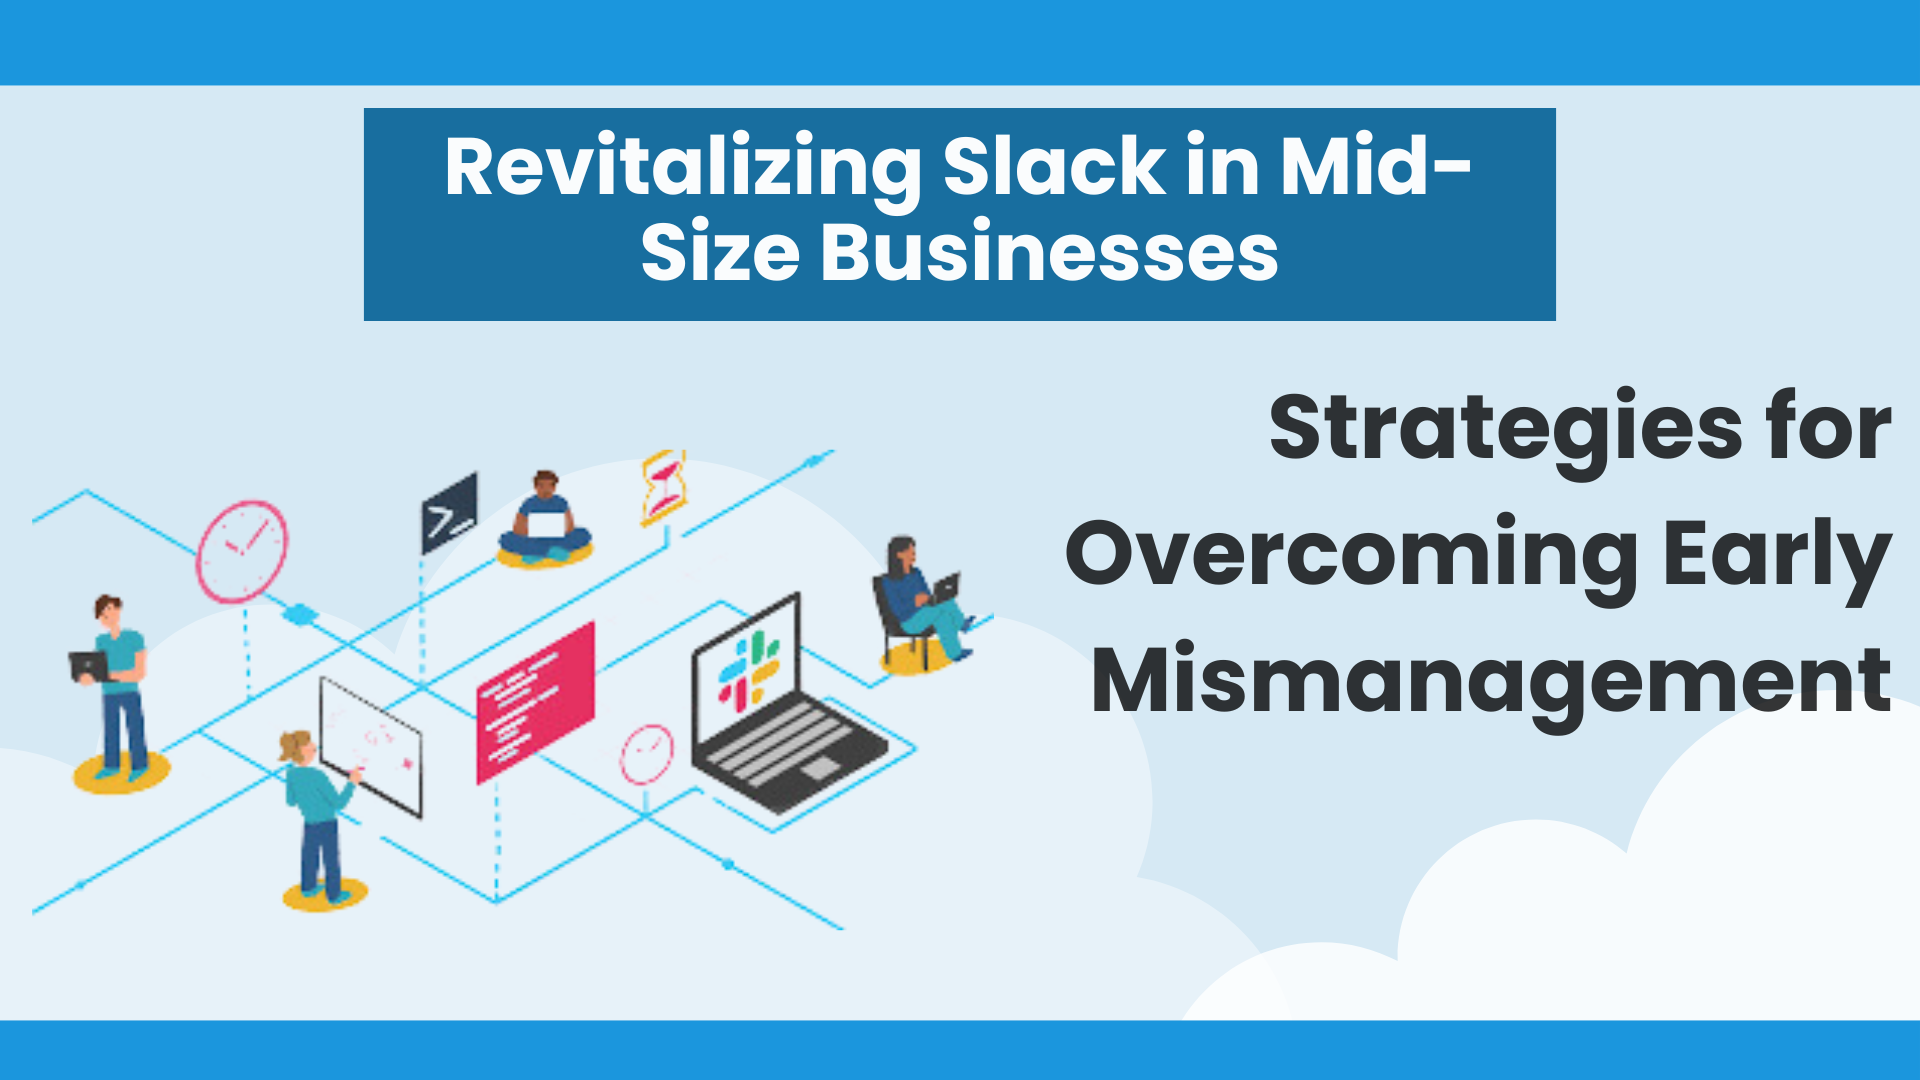 Reviving Slack in Mid-Size Businesses: Strategies to Overcome Mismanagement